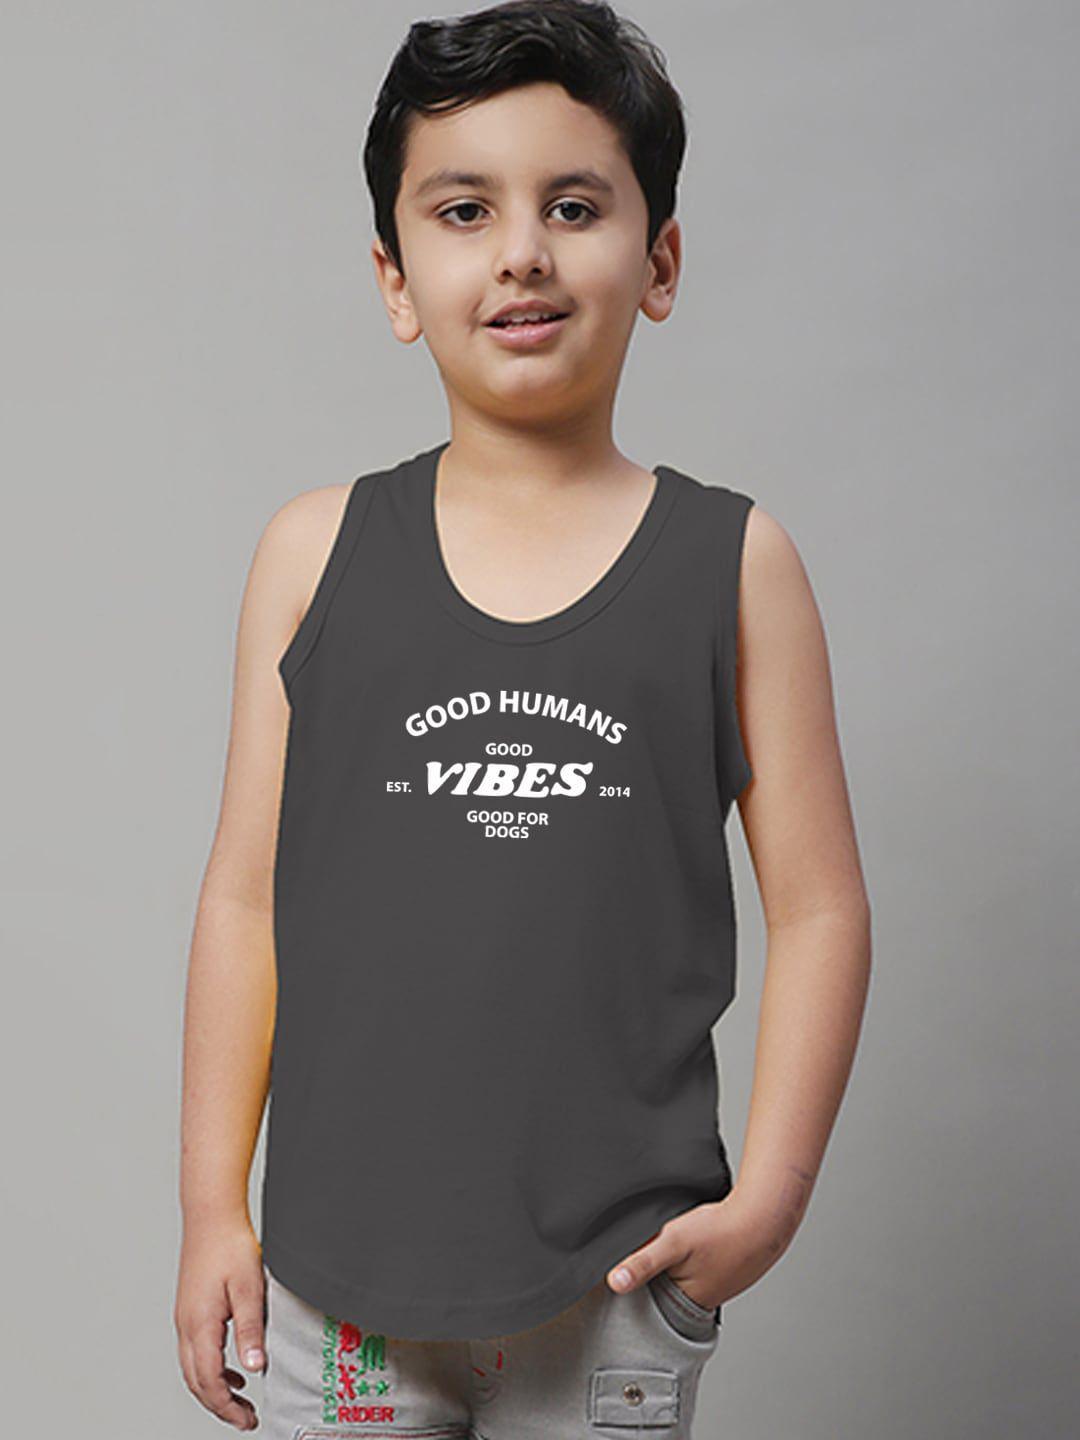 Friskers Boys Typographic Printed Pure Cotton Innerwear Vests